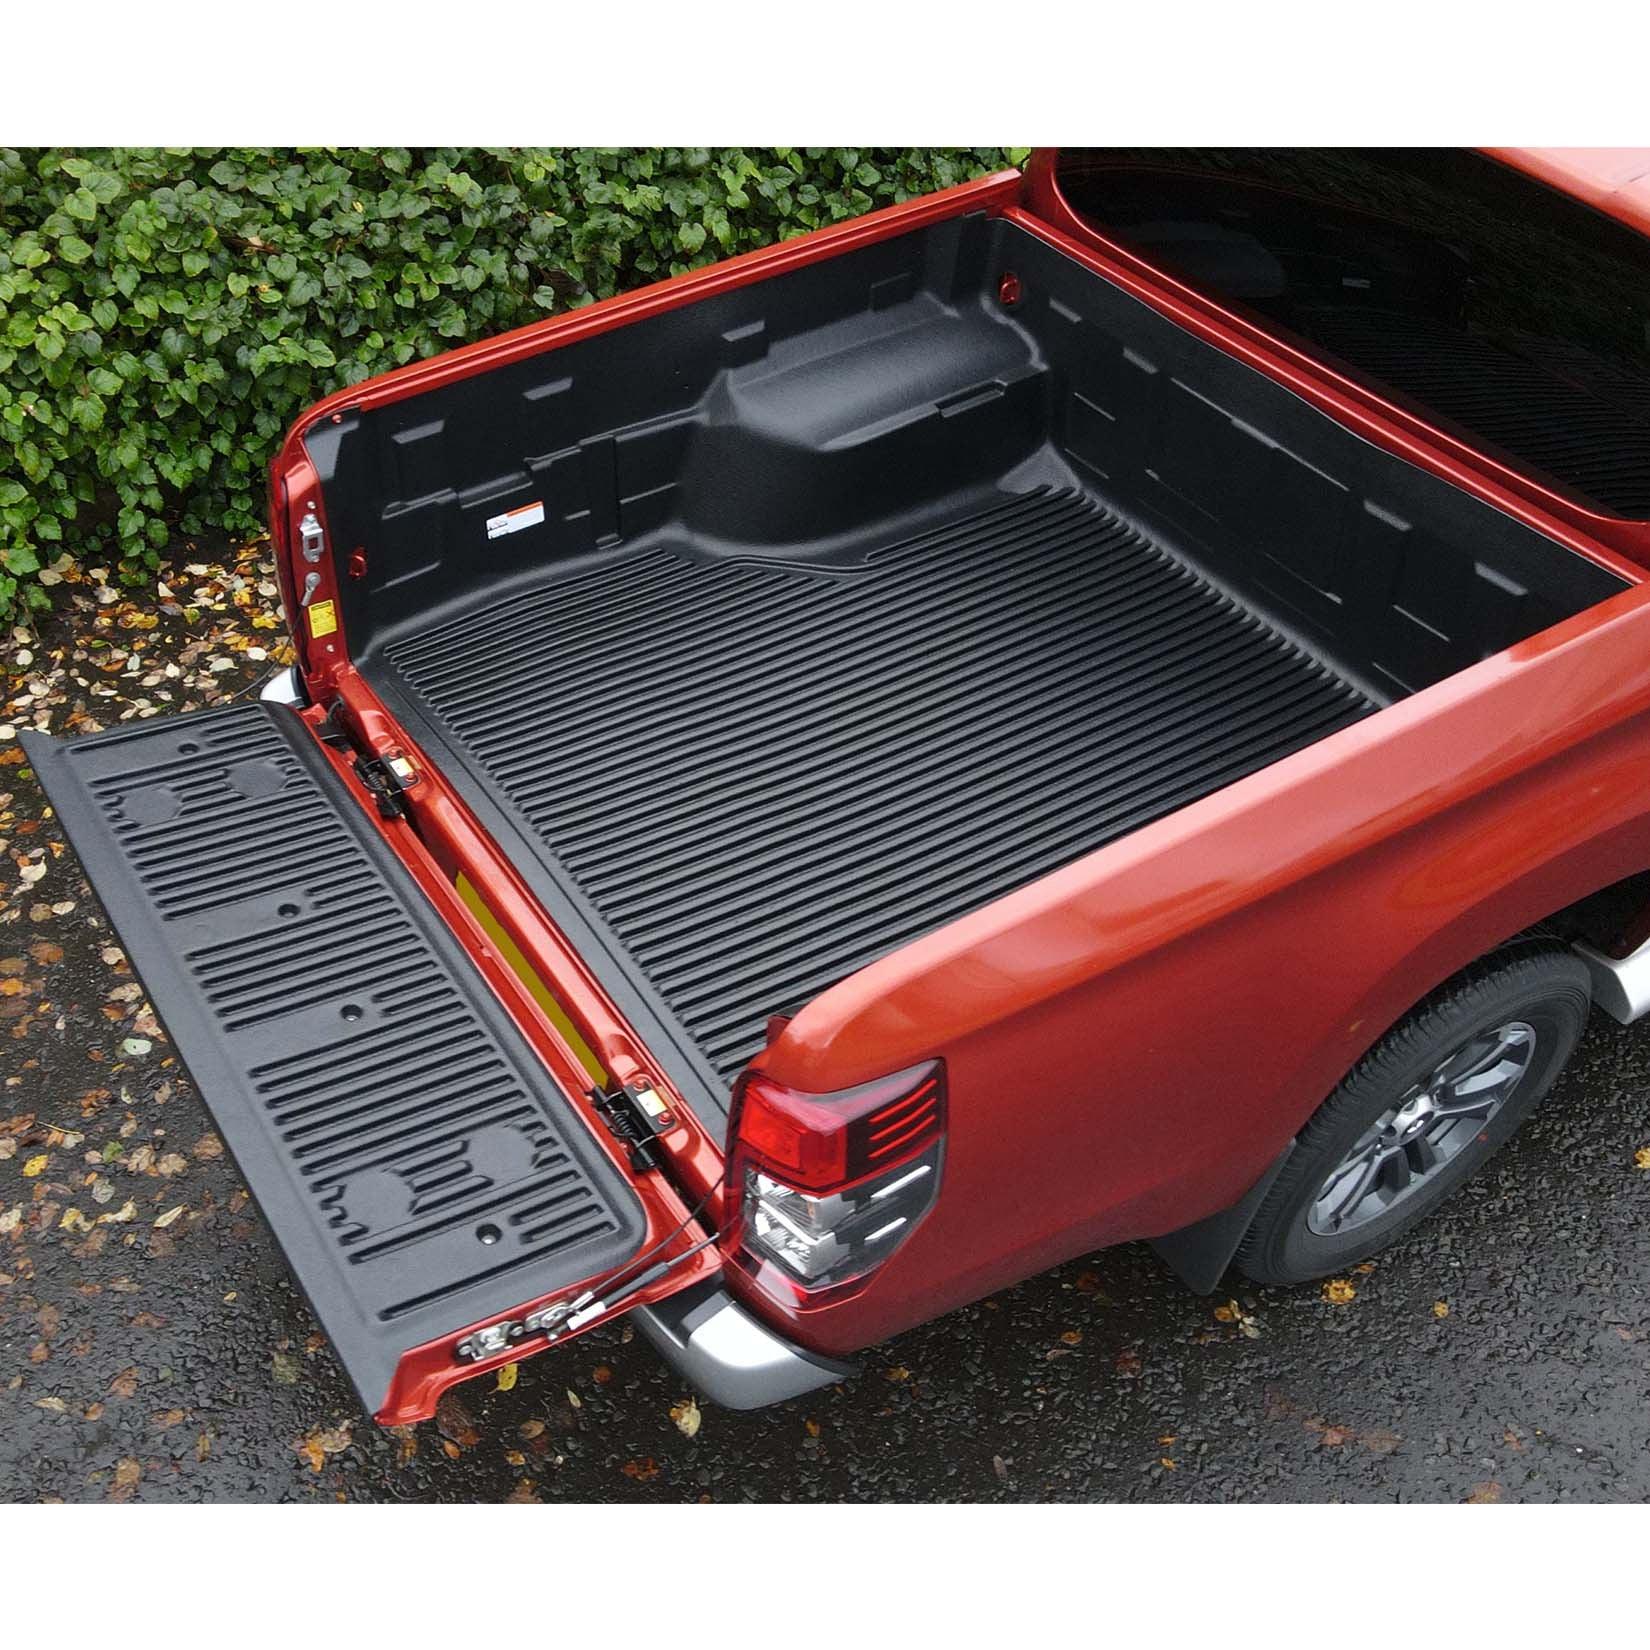 MITSUBISHI L200 SERIES 6 2019 ON DOUBLE CAB UNDER RAIL LOAD BED LINER - Storm Xccessories2